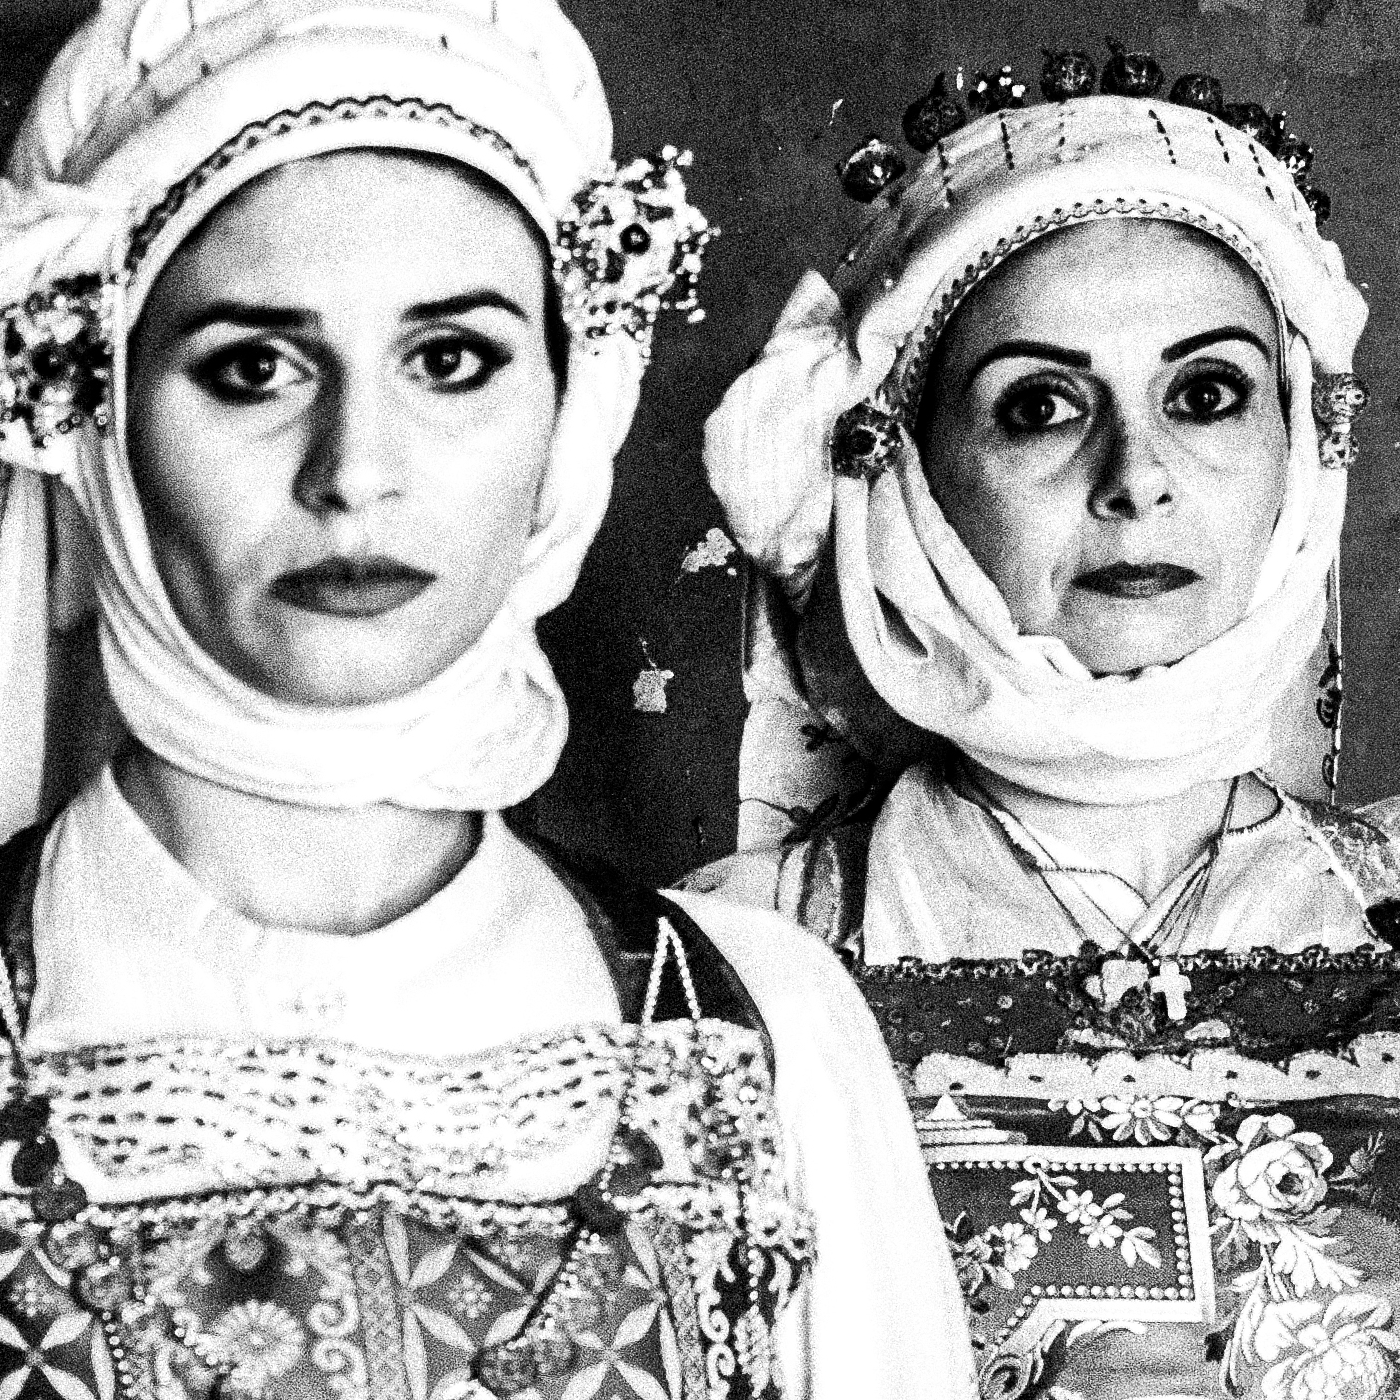 Black and White Photography Wall Art Greece | Olympoi costumes Mastichochorea Chios island Greece by George Tatakis - detailed view